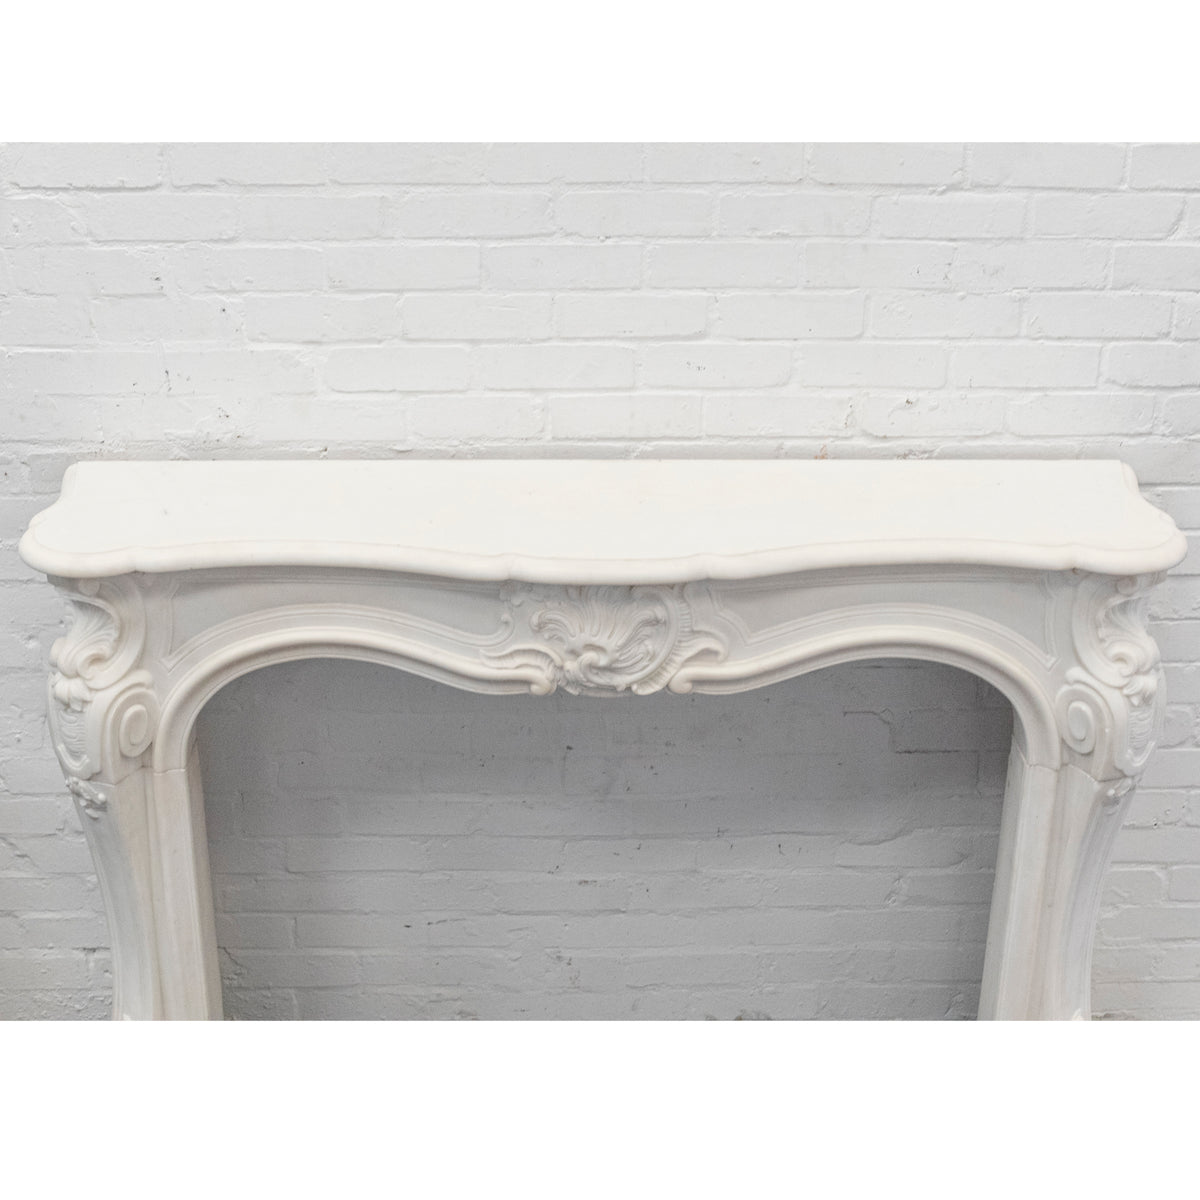 Antique 19th Century Louis XV style French Marble Fireplace | The Architectural Forum